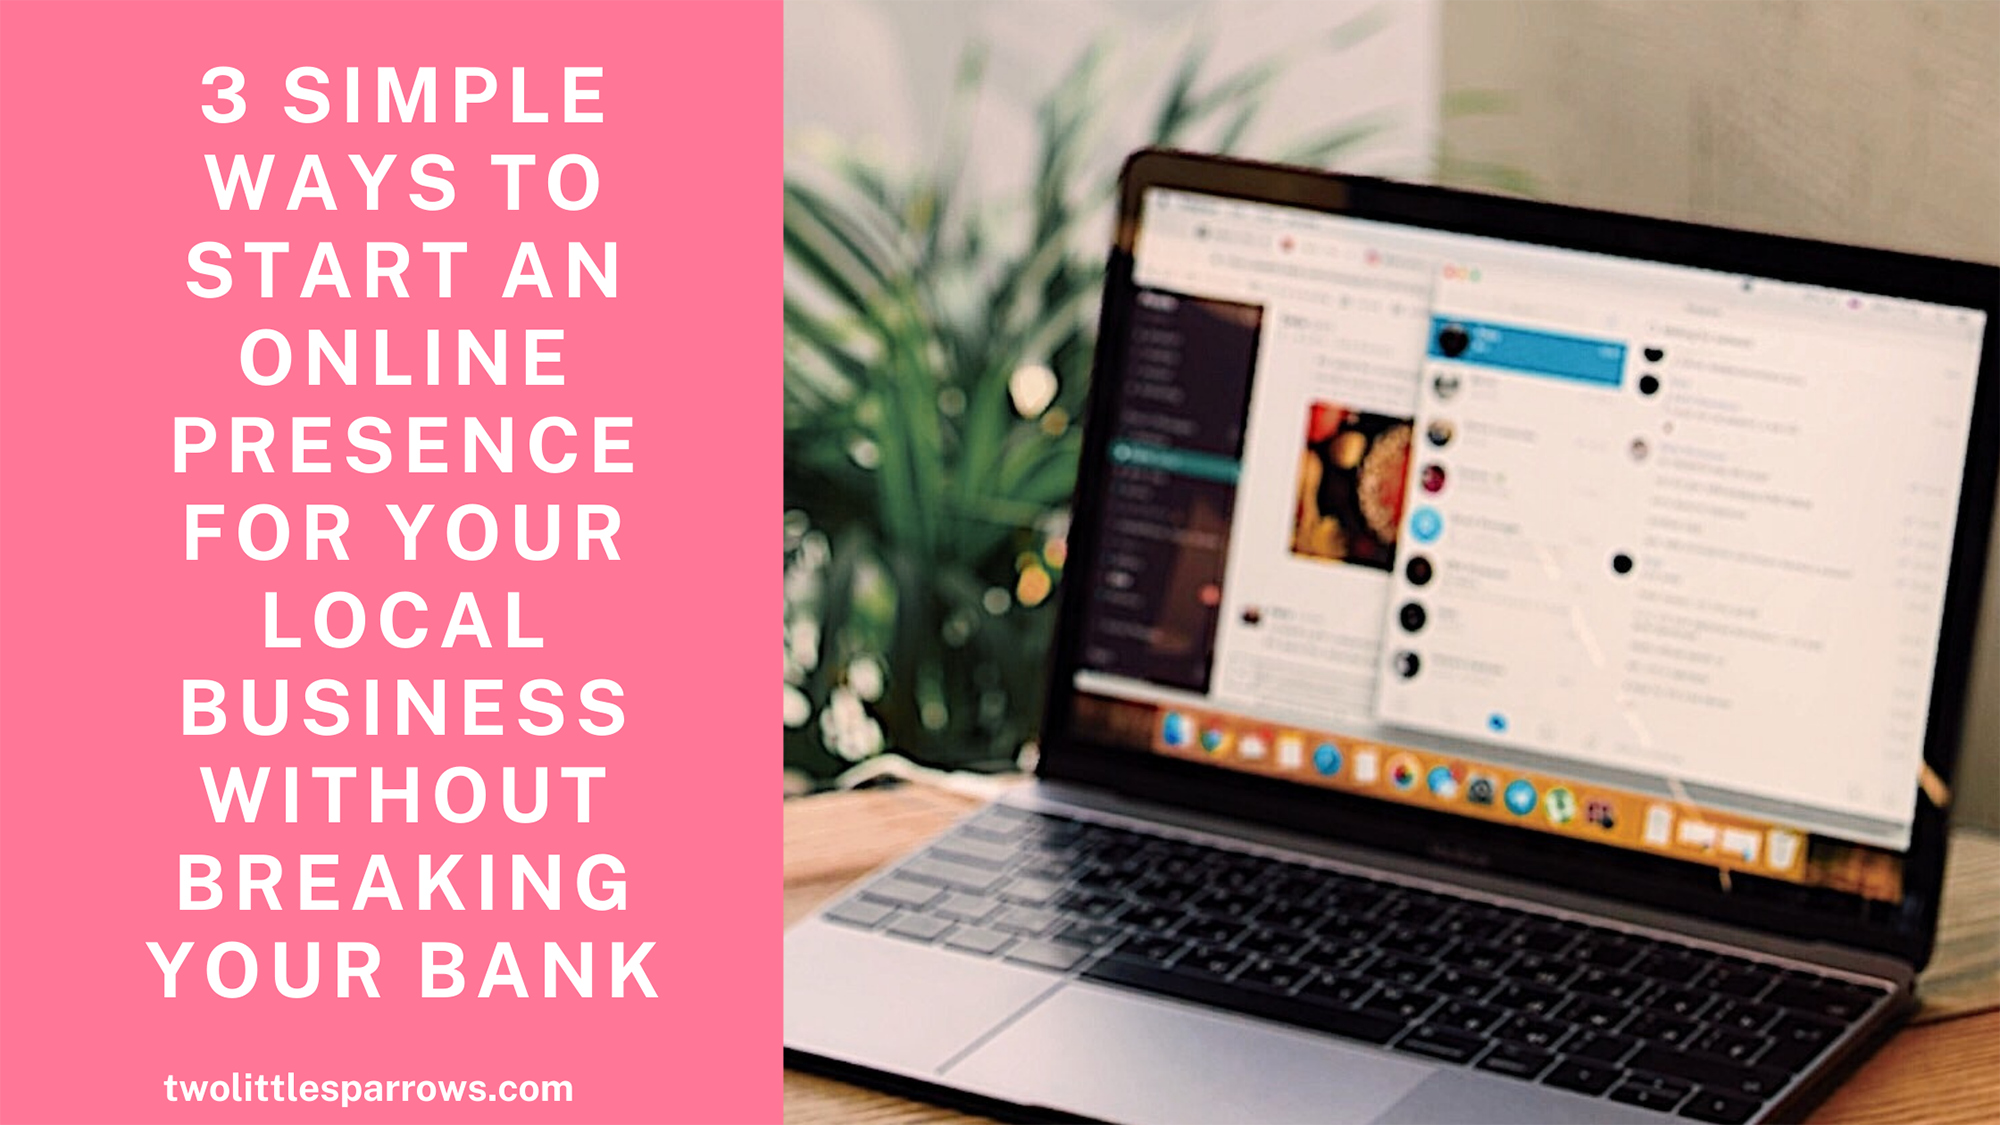 3 Simple Ways to start an online presence for your Local Business without breaking your bank